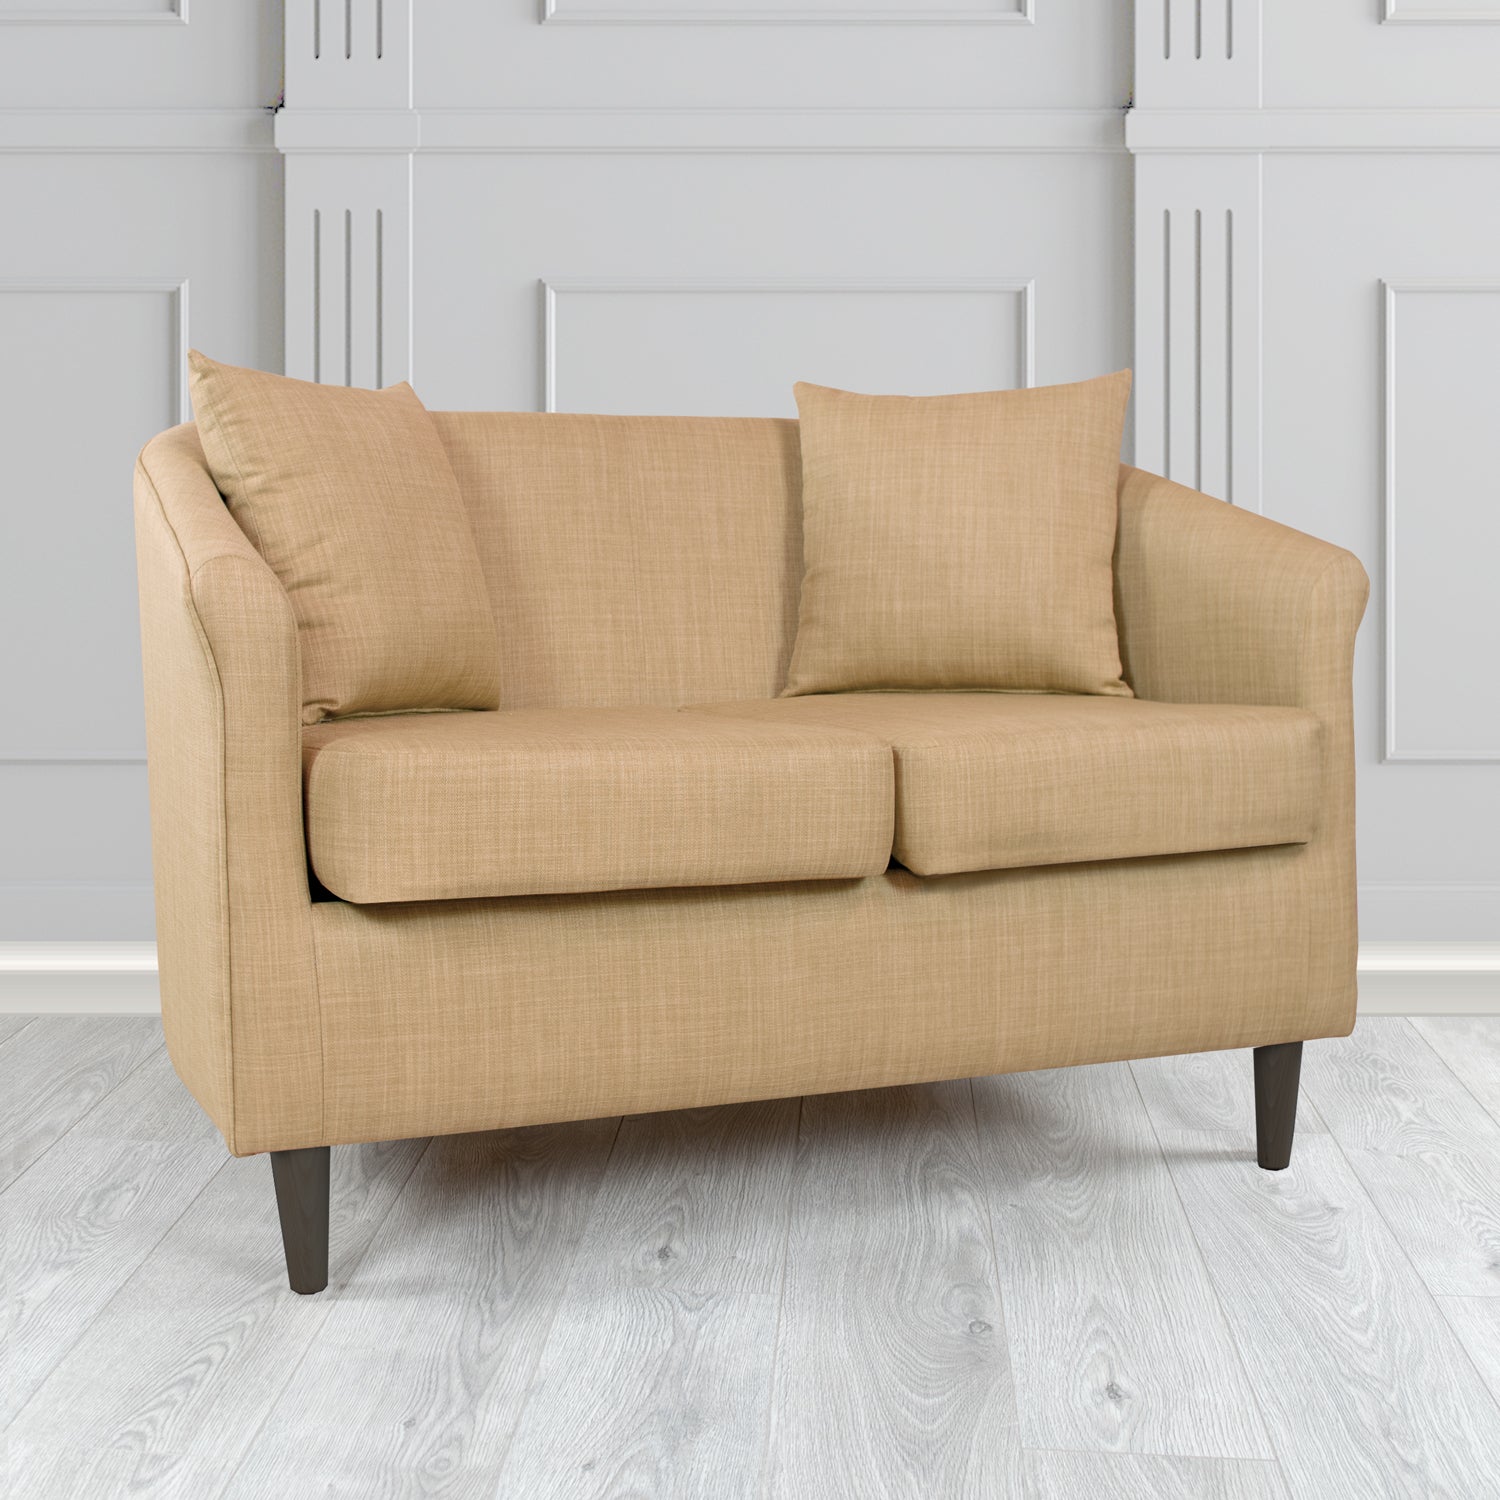 St Tropez Charles Honey Plain Linen Fabric 2 Seater Tub Sofa with Scatter Cushions - The Tub Chair Shop